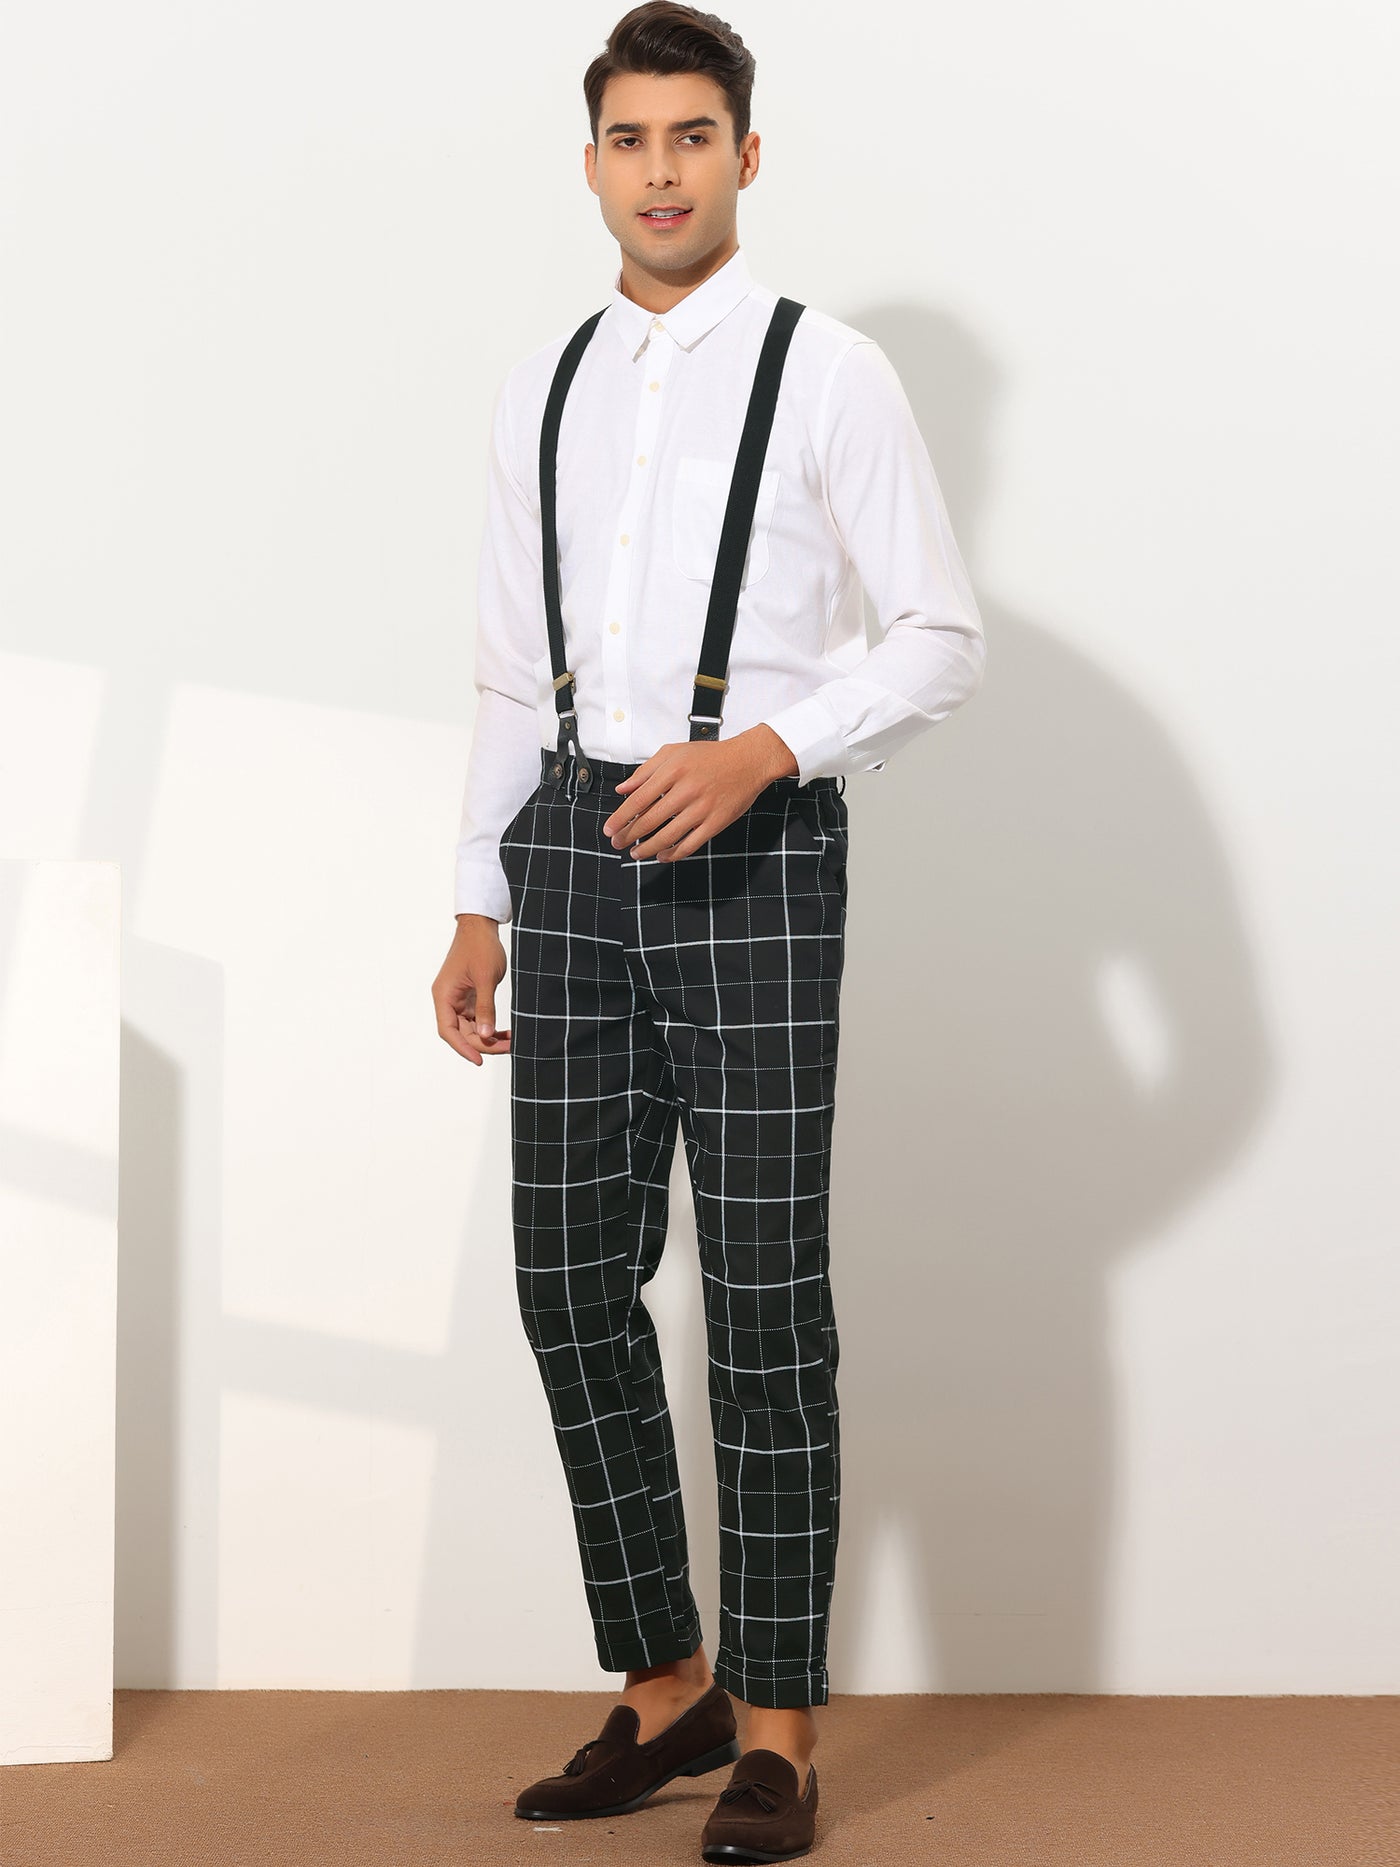 Bublédon Formal Plaid Dress Pants for Men's Slim Fit Tapered Checked Trousers with Suspender